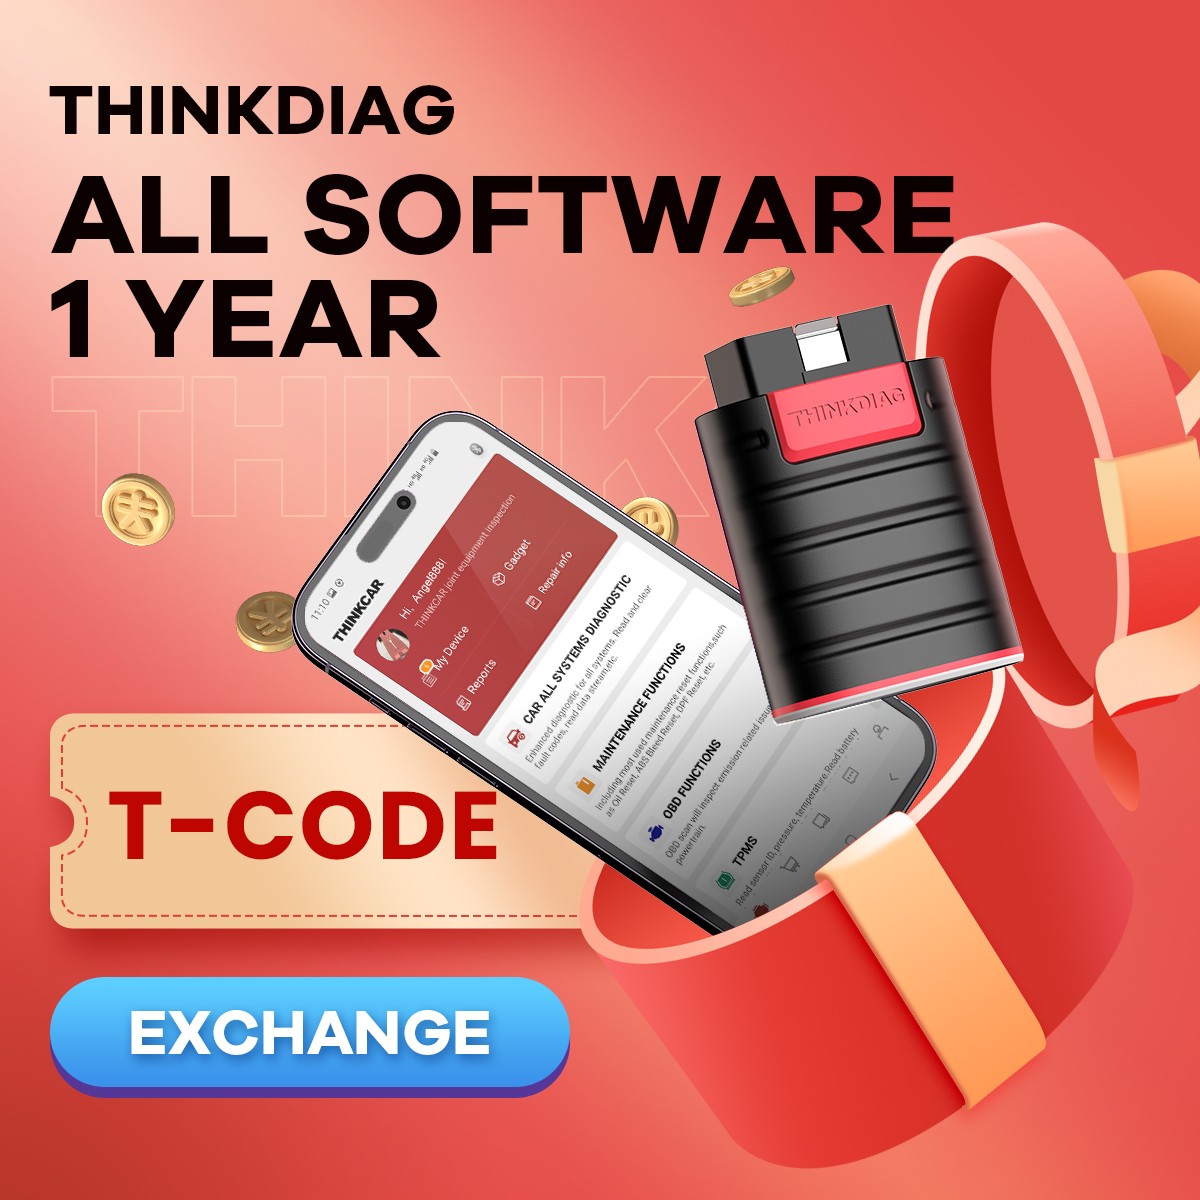 THINKCAR Thinkdiag Full System OBD2 Diagnostic Tool with All Brands License  Free Update for One Year